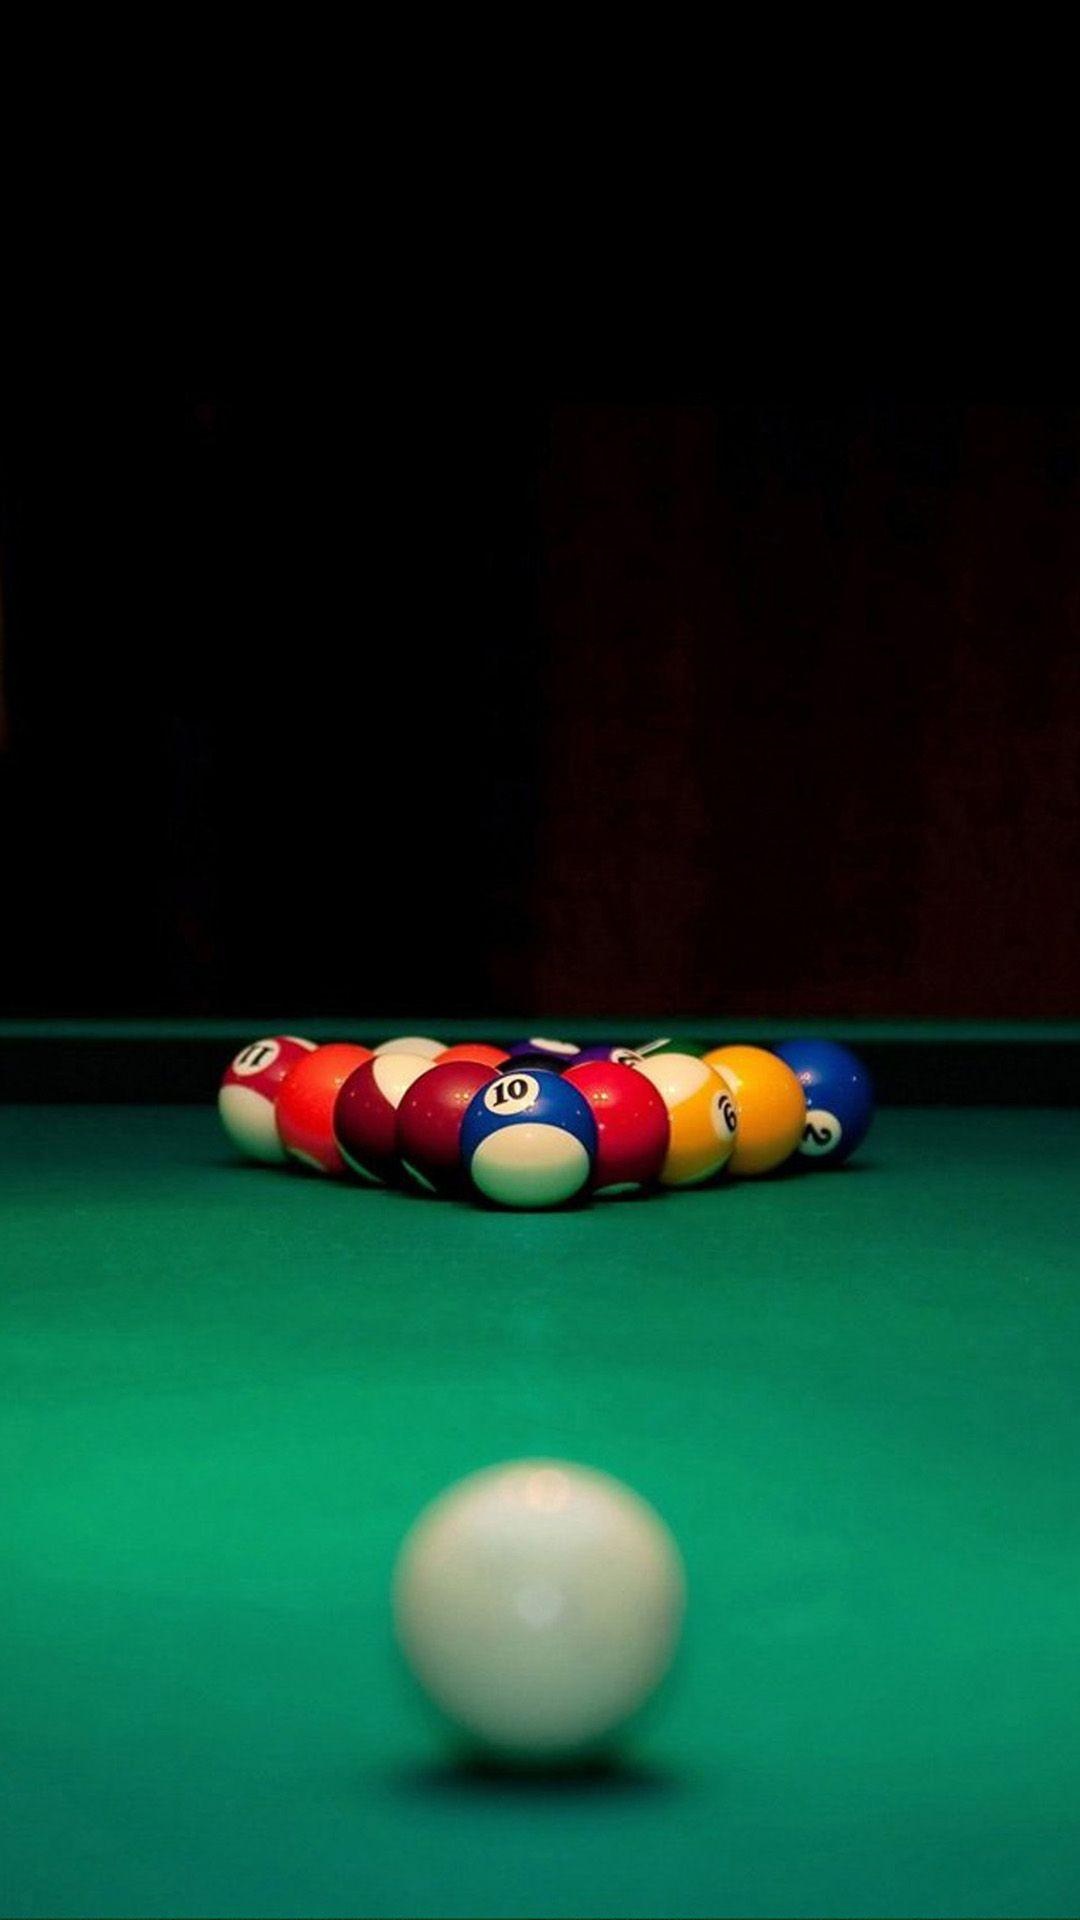 Cue Sports: A white cue ball before the break shot in a classic eightball type of a recreational sport. 1080x1920 Full HD Wallpaper.